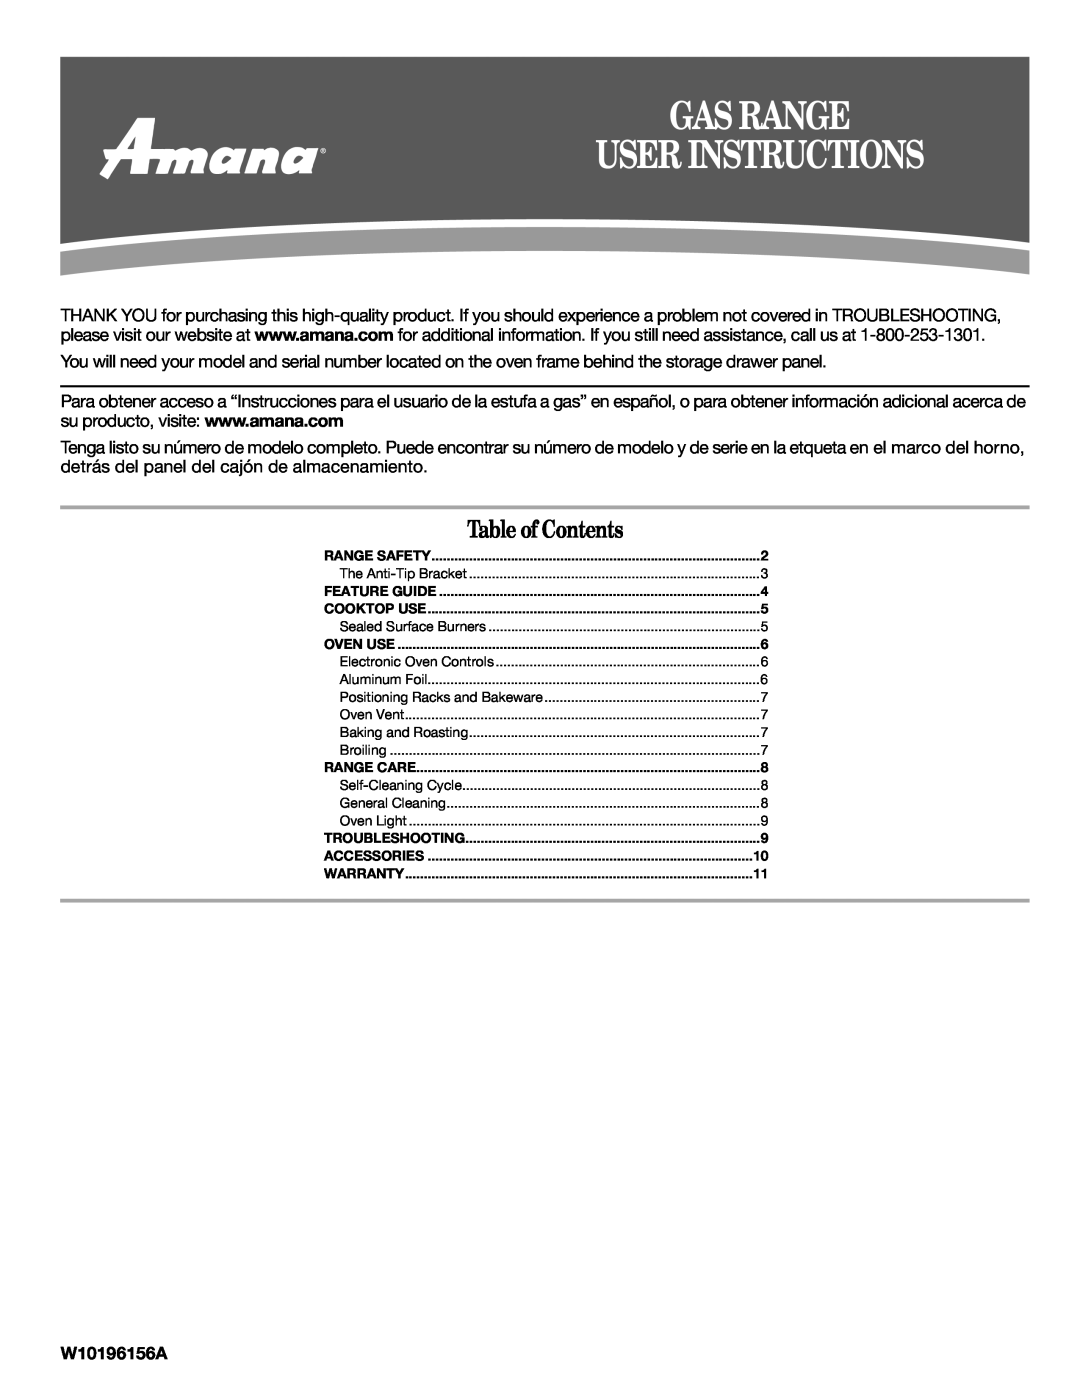 Amana W10196156A, W10204508A warranty Gas Range User Instructions, Table of Contents 